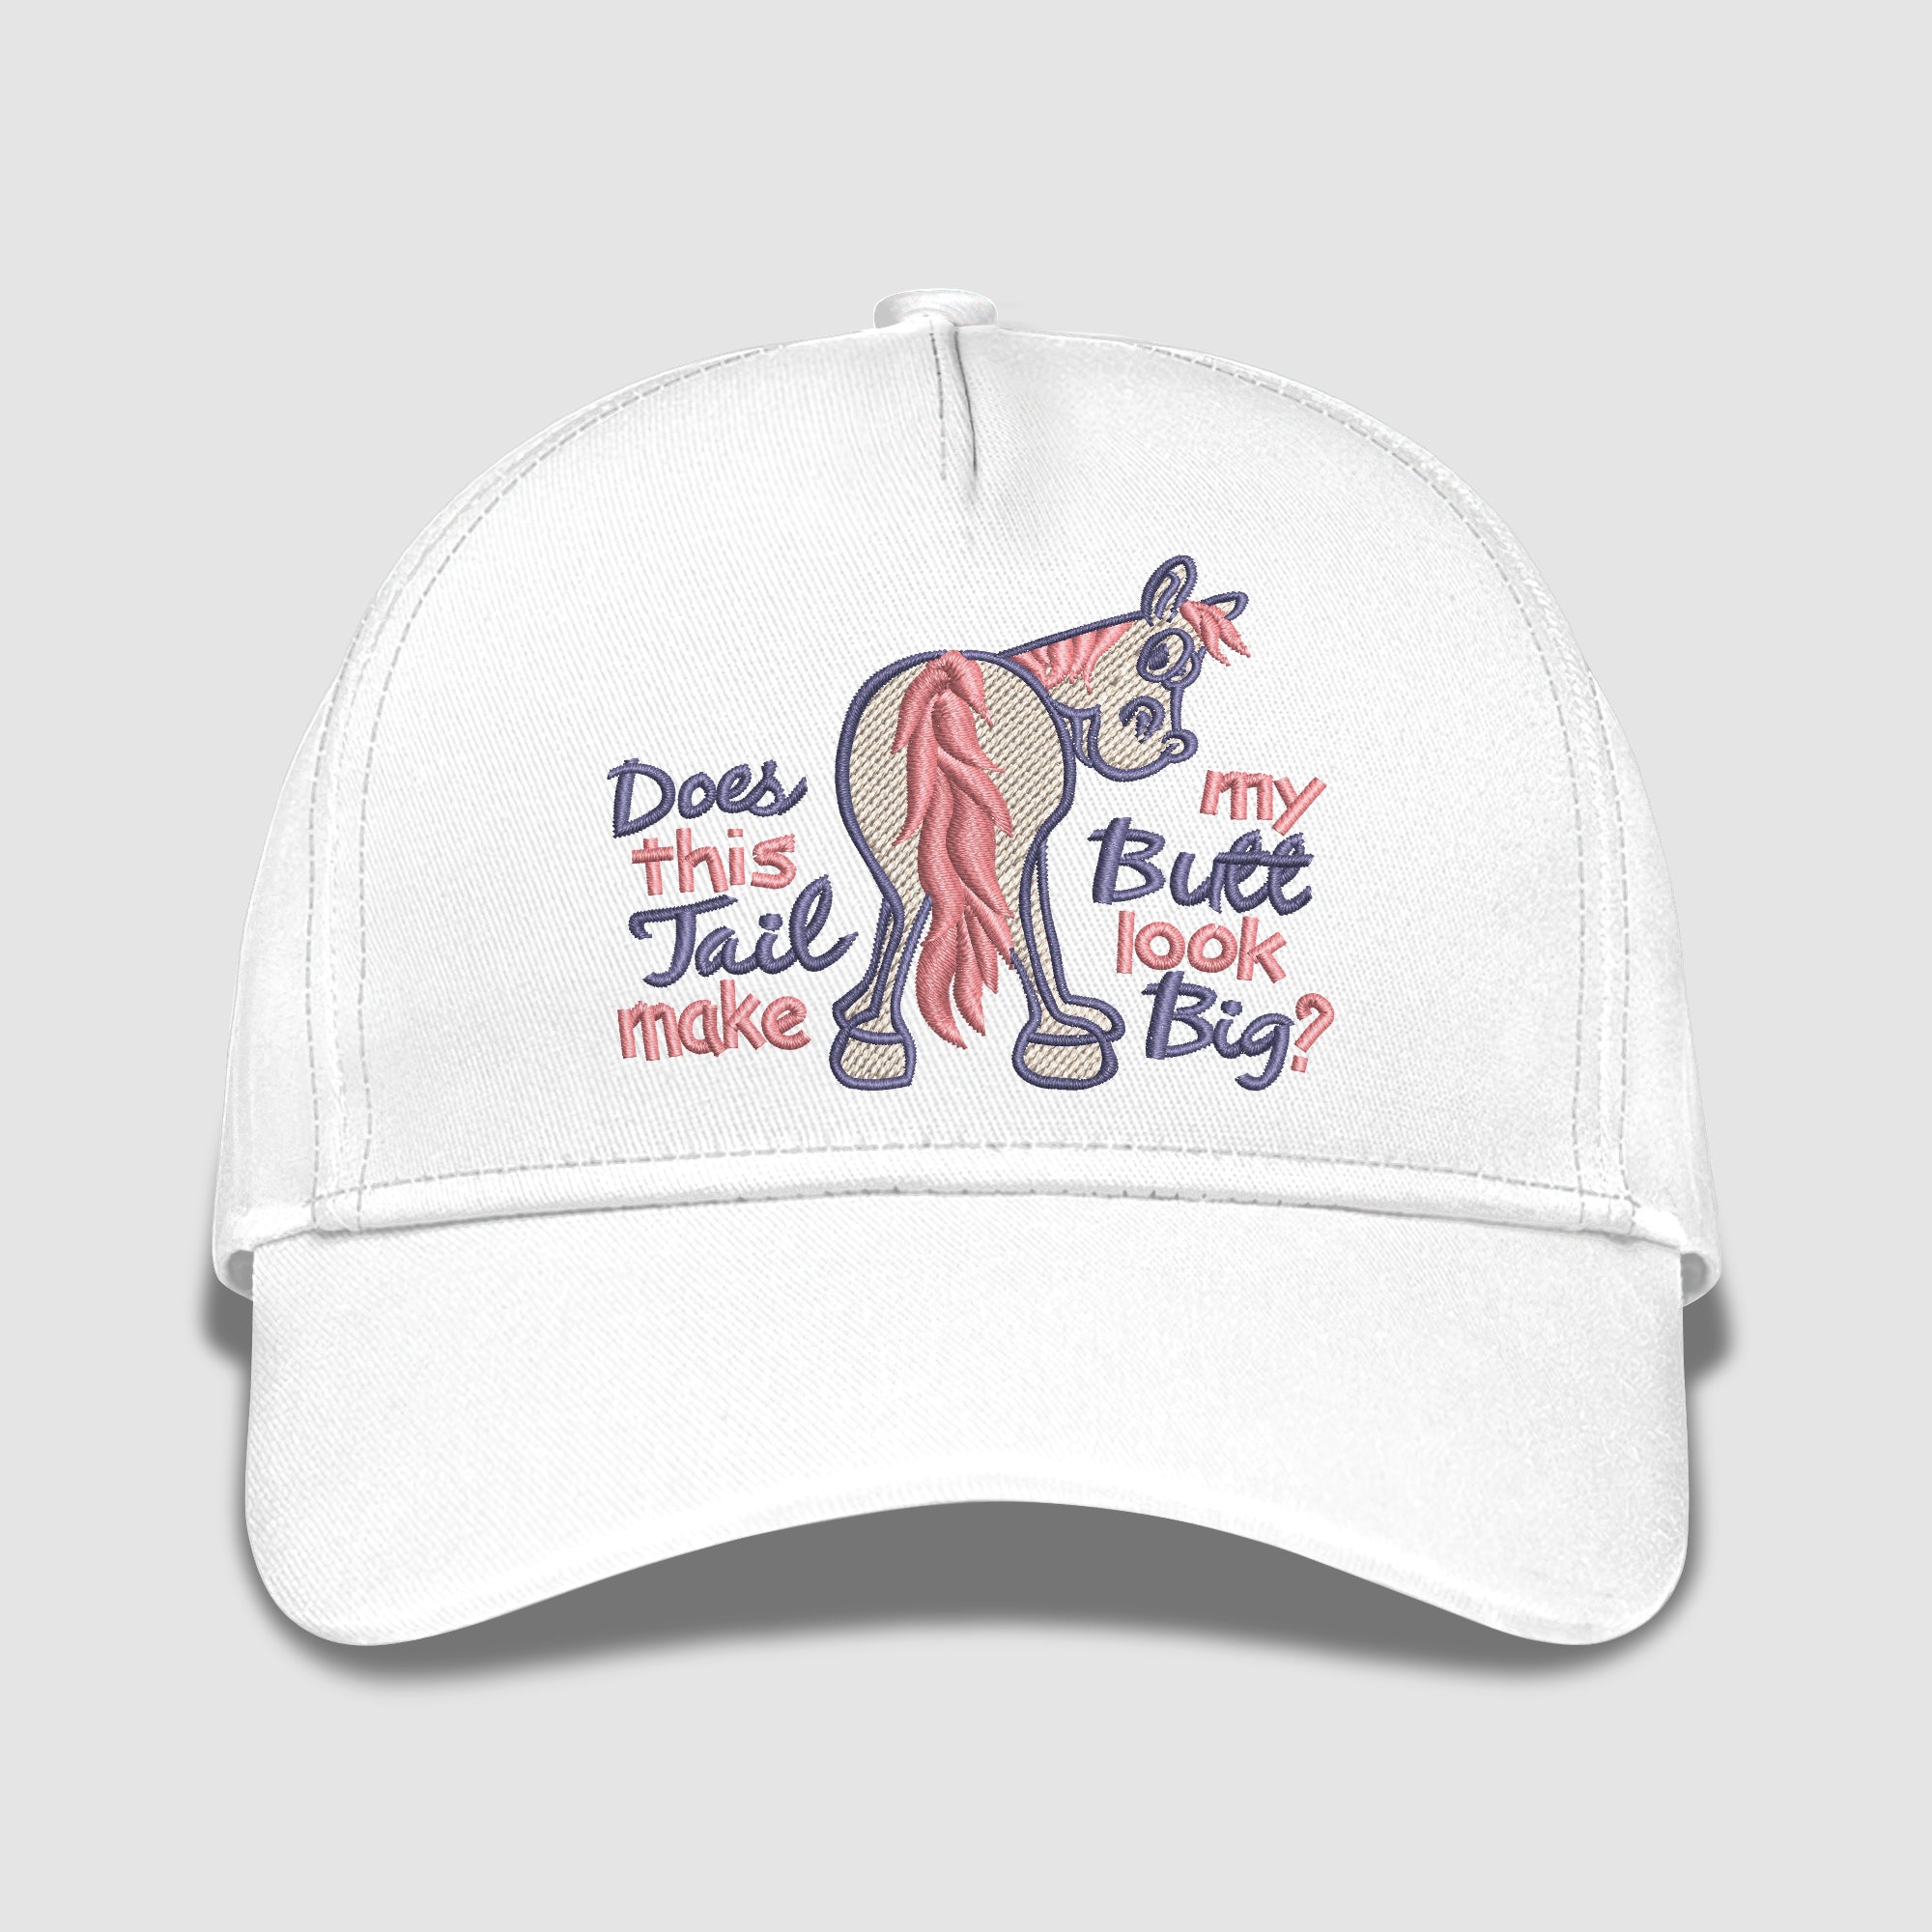 Doer This Tail Make My Butt Look Big? Embroidered Baseball Caps